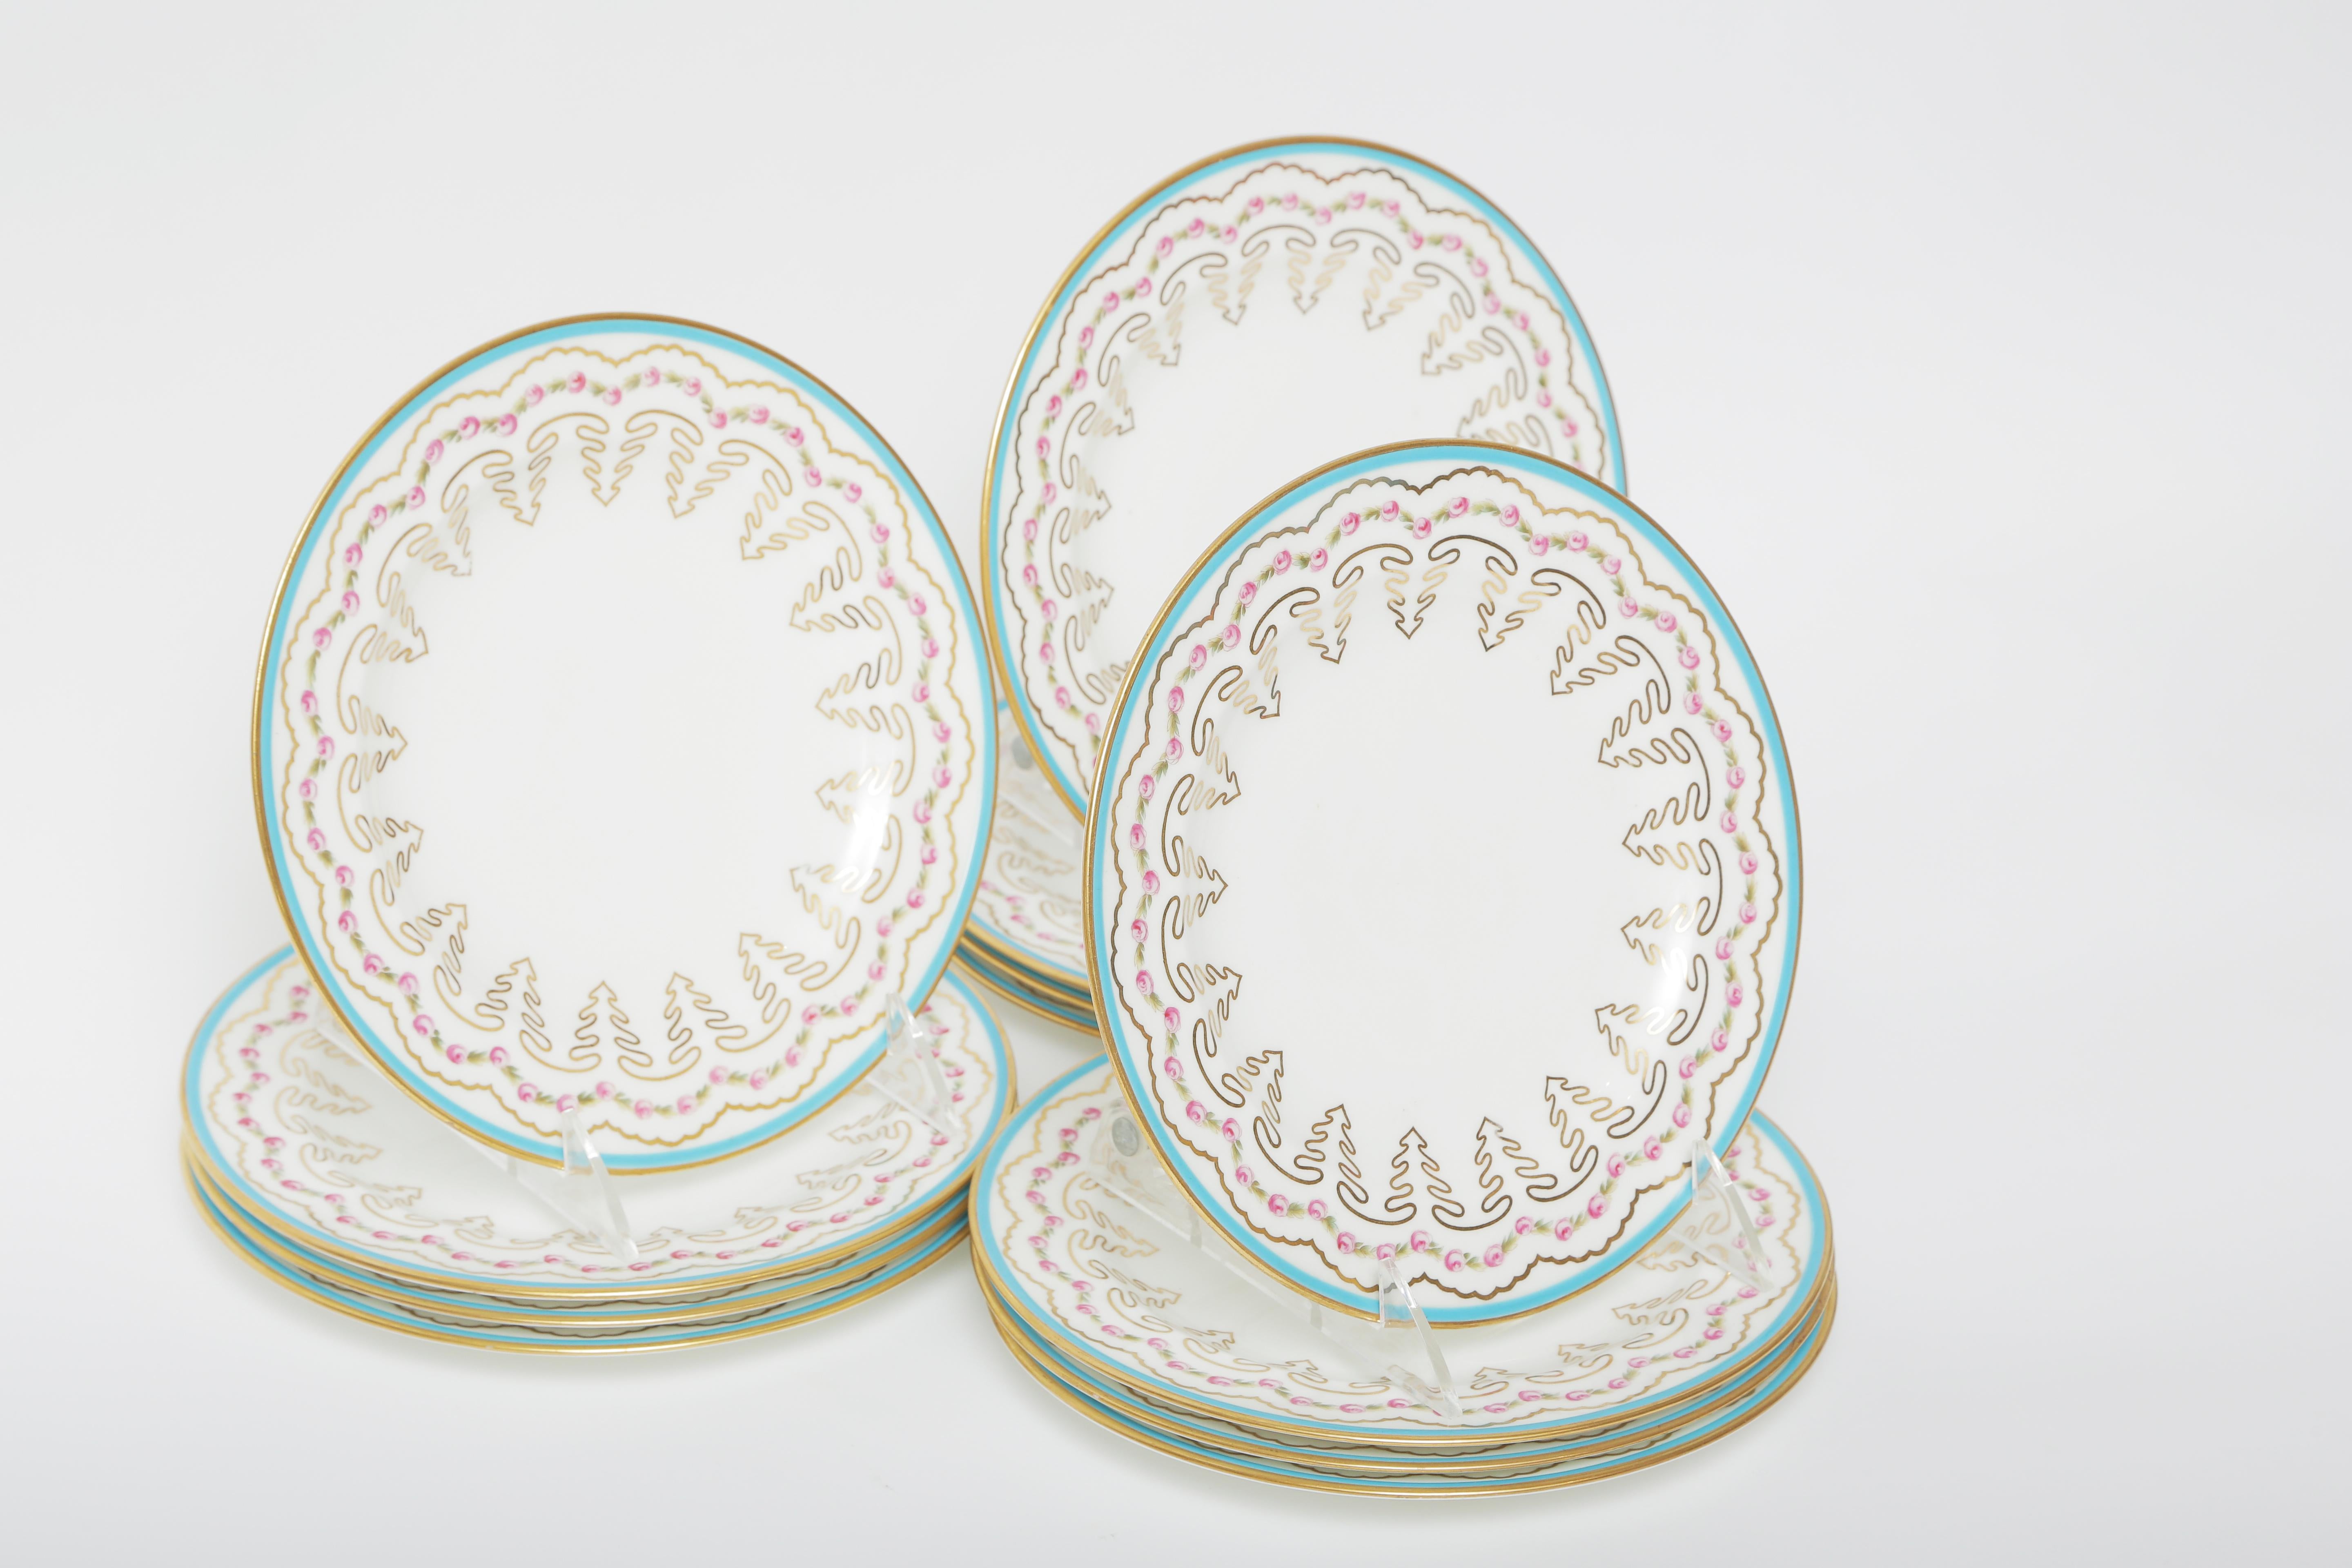 A pretty set of first course, salad or dessert plates by the Gilded Age Porcelain firm of Cauldon, England. This set features a turquoise border, hand painted roses and an interesting gilt design through the collar of the plate. A crisp white